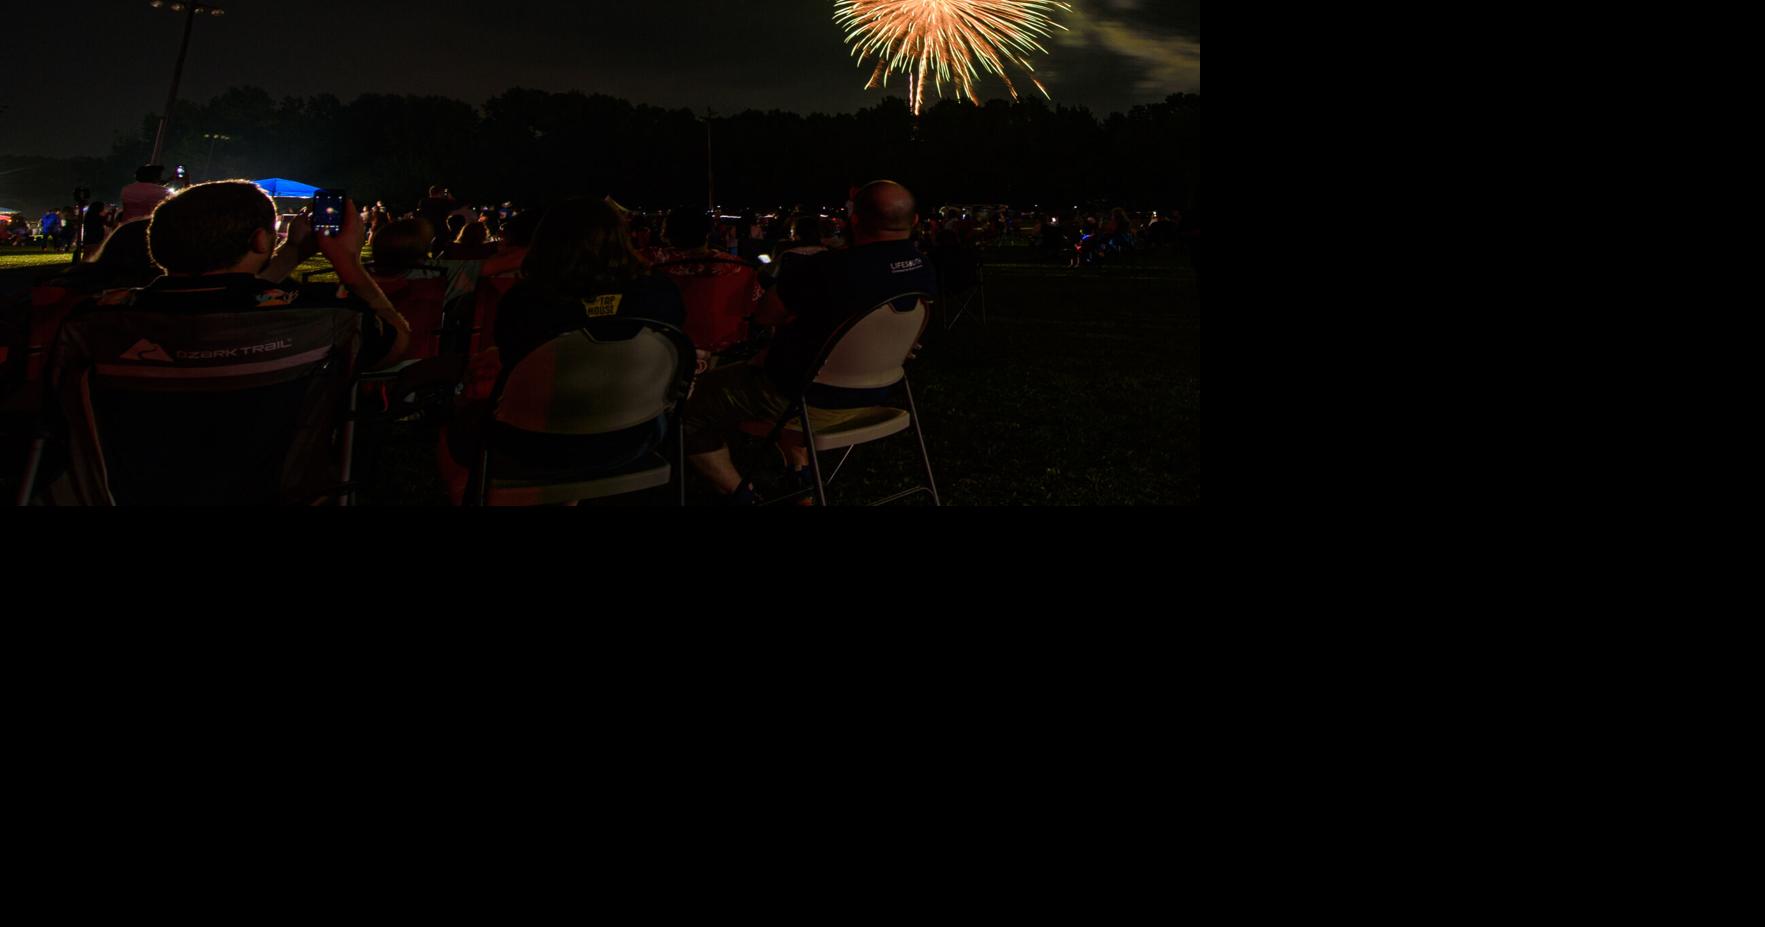 Auburn Fourth of July brings food and fireworks